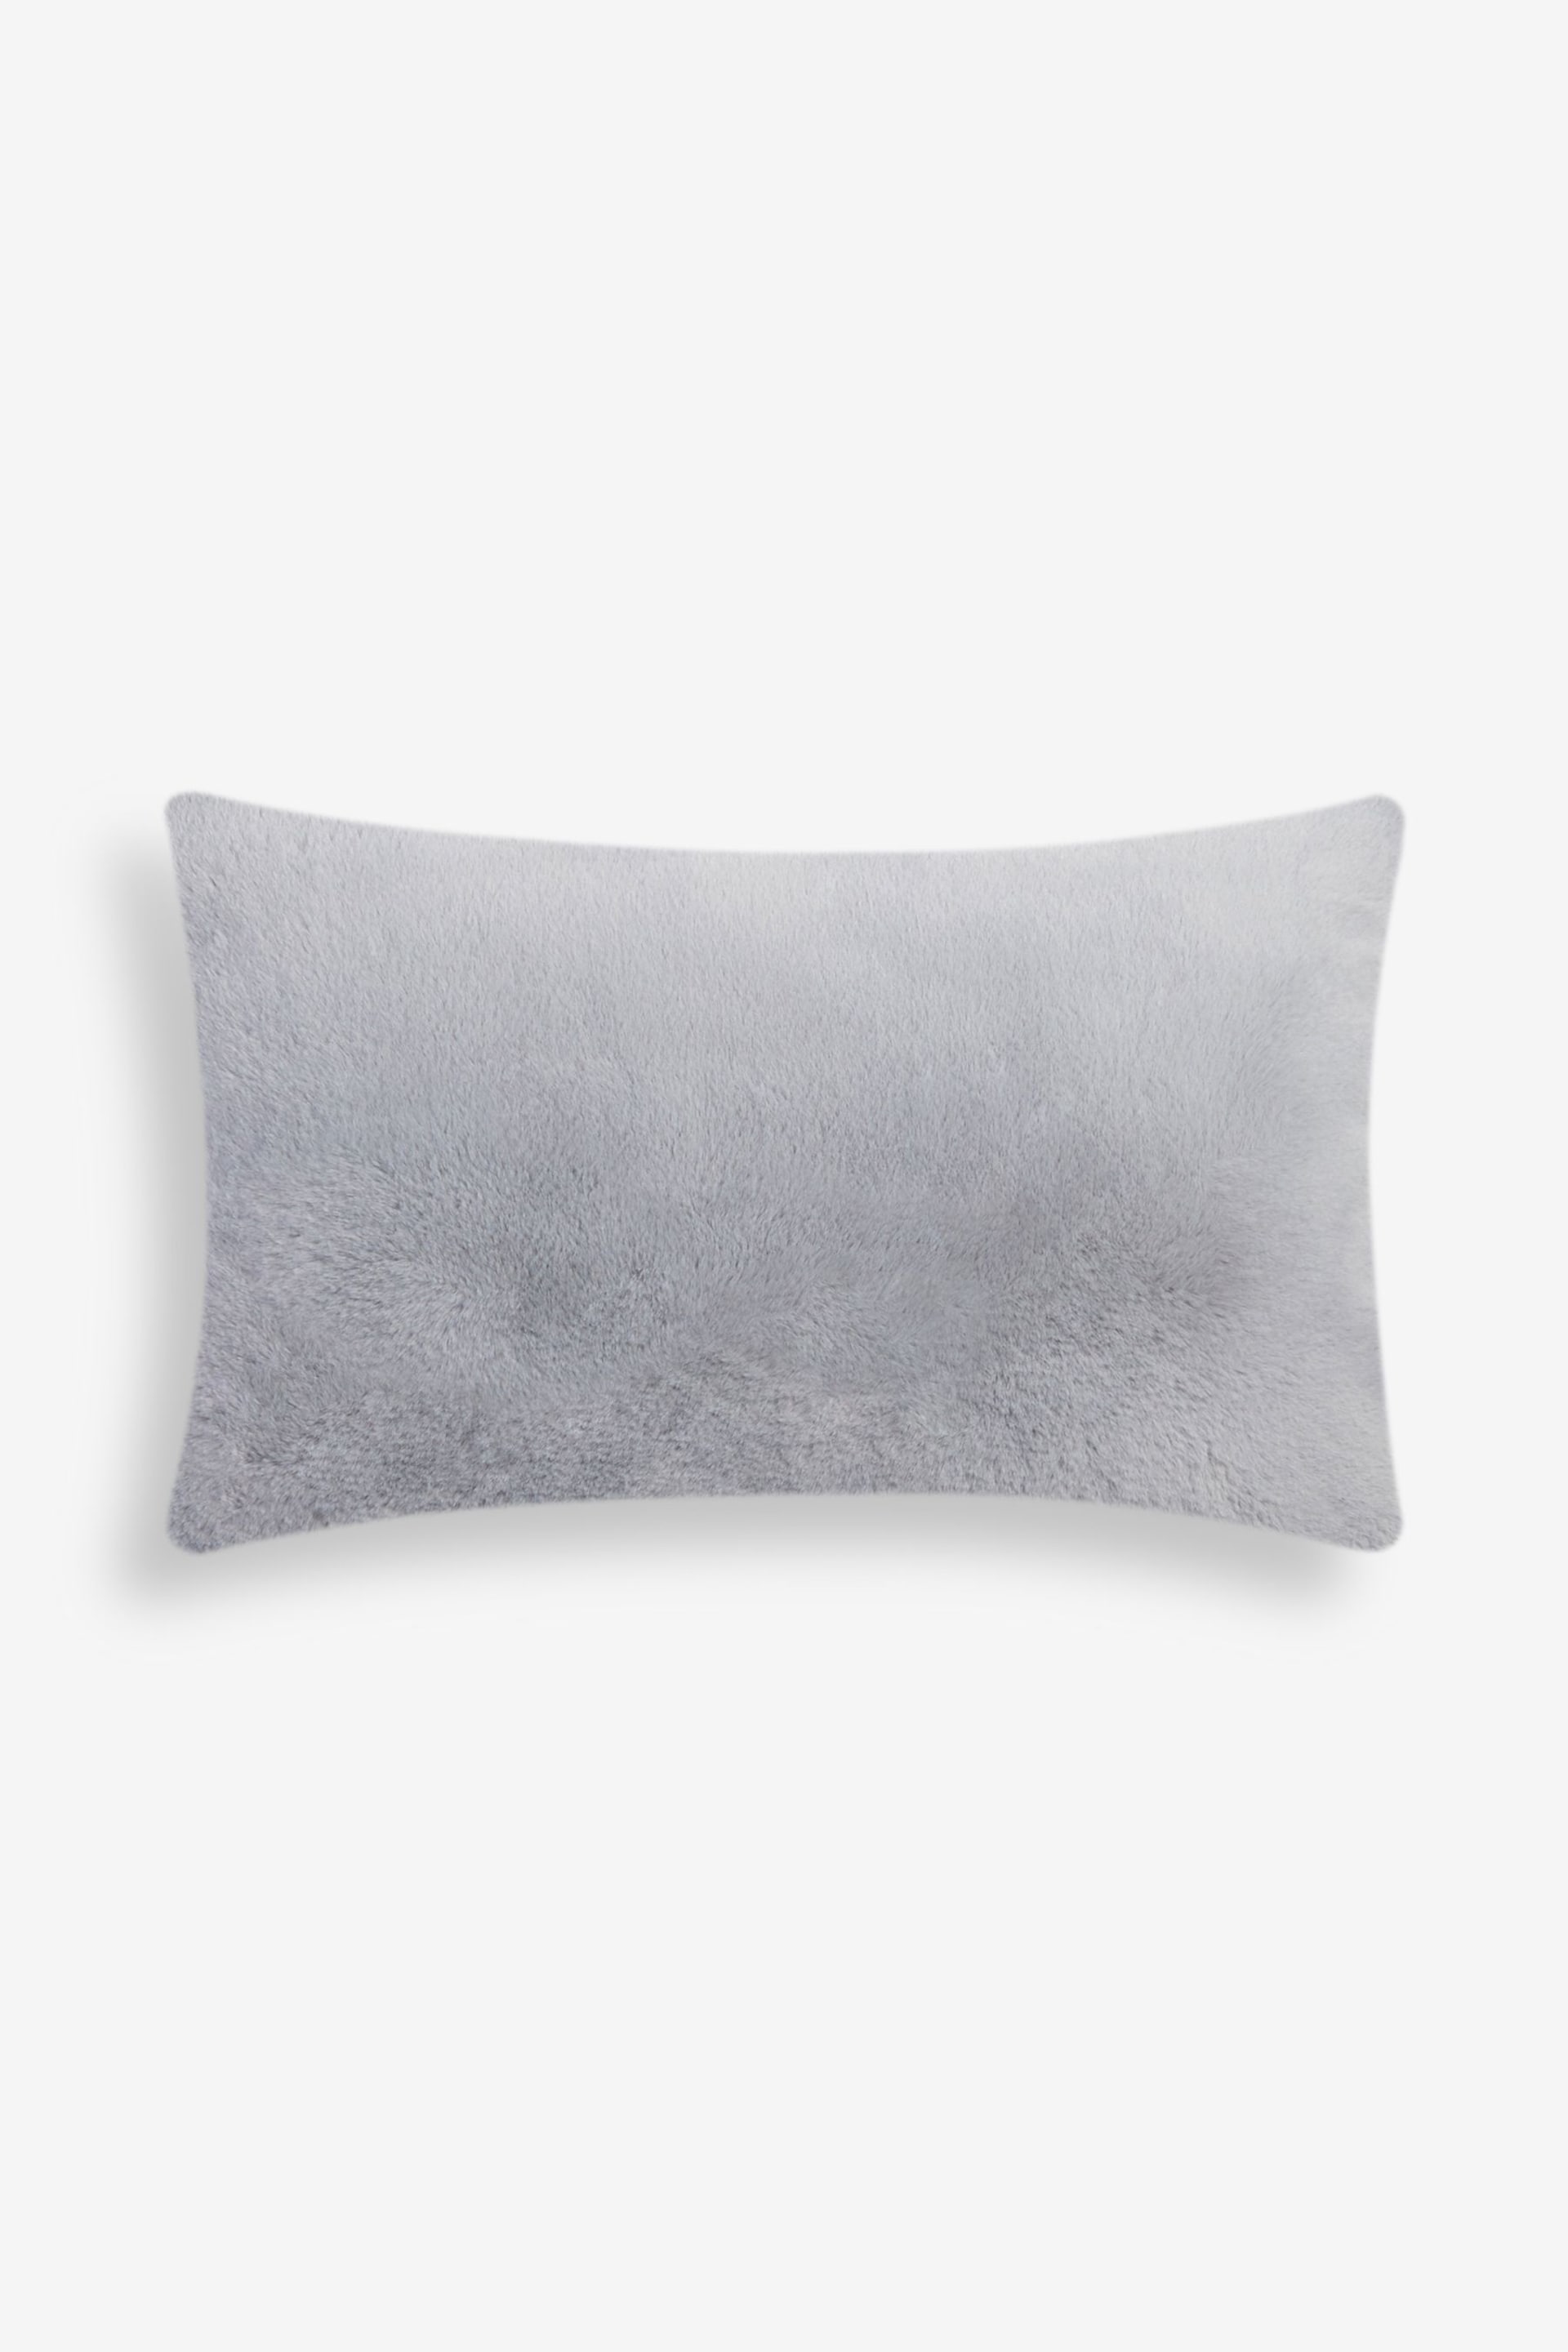 Grey Soft To Touch Plush 40 x 59cm Faux Fur Cushion - Image 2 of 4